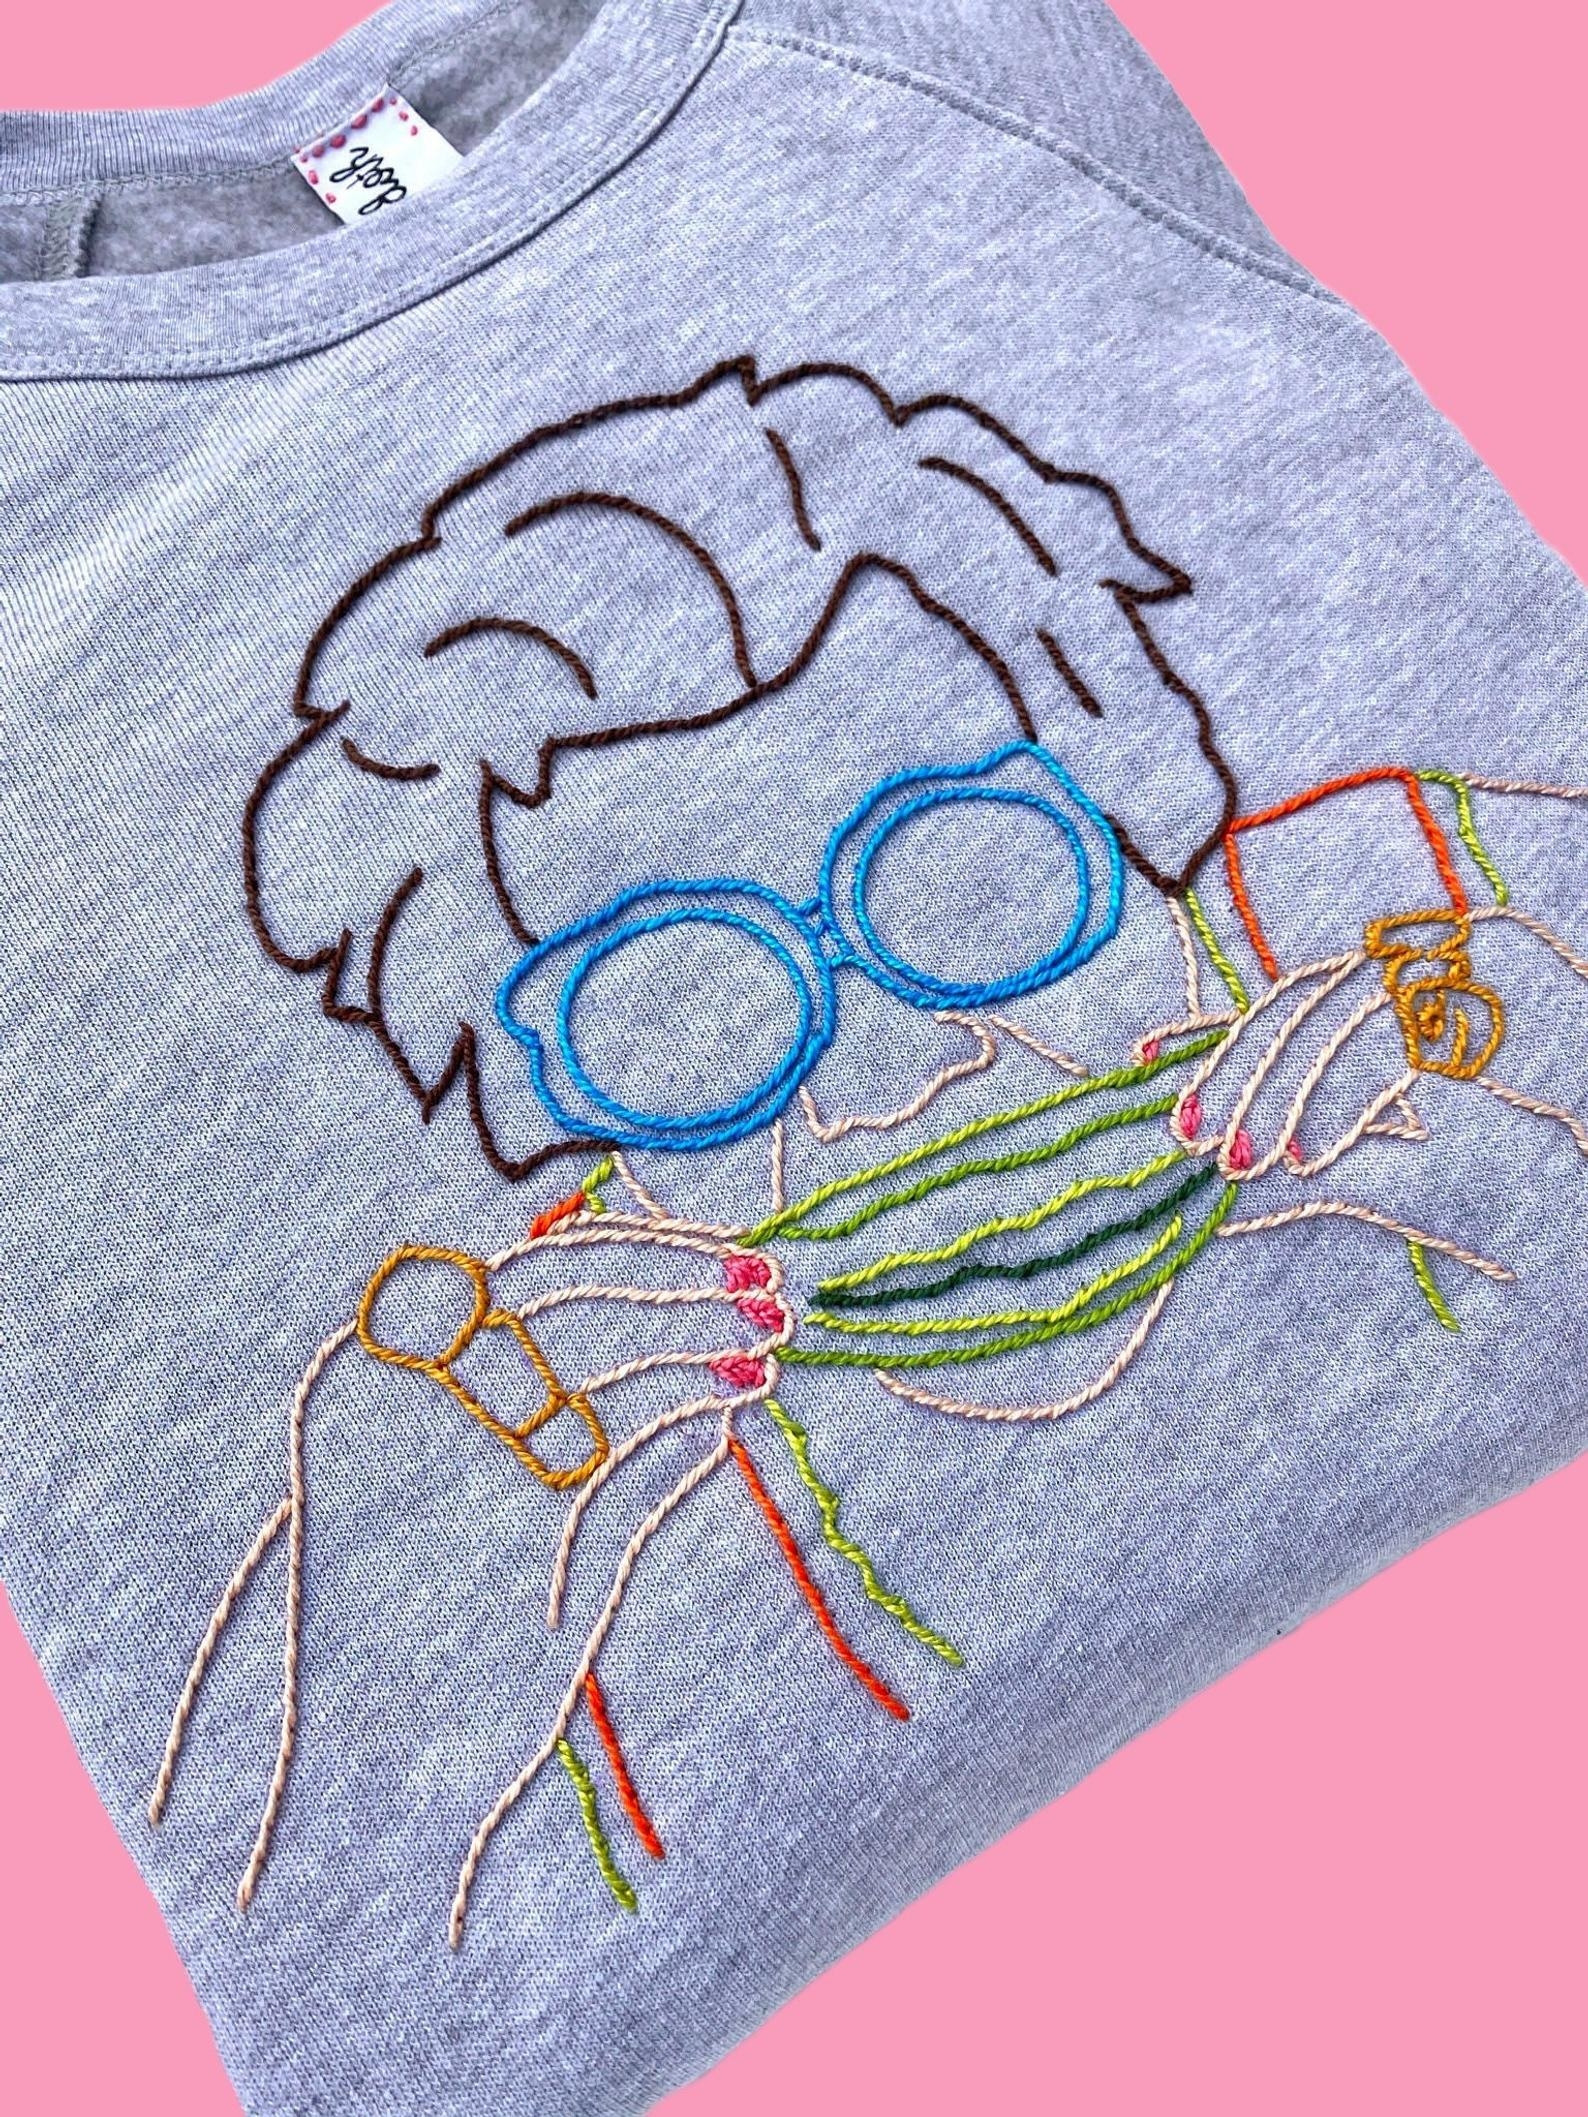 The grey sweatshirt with multicolored embroidery